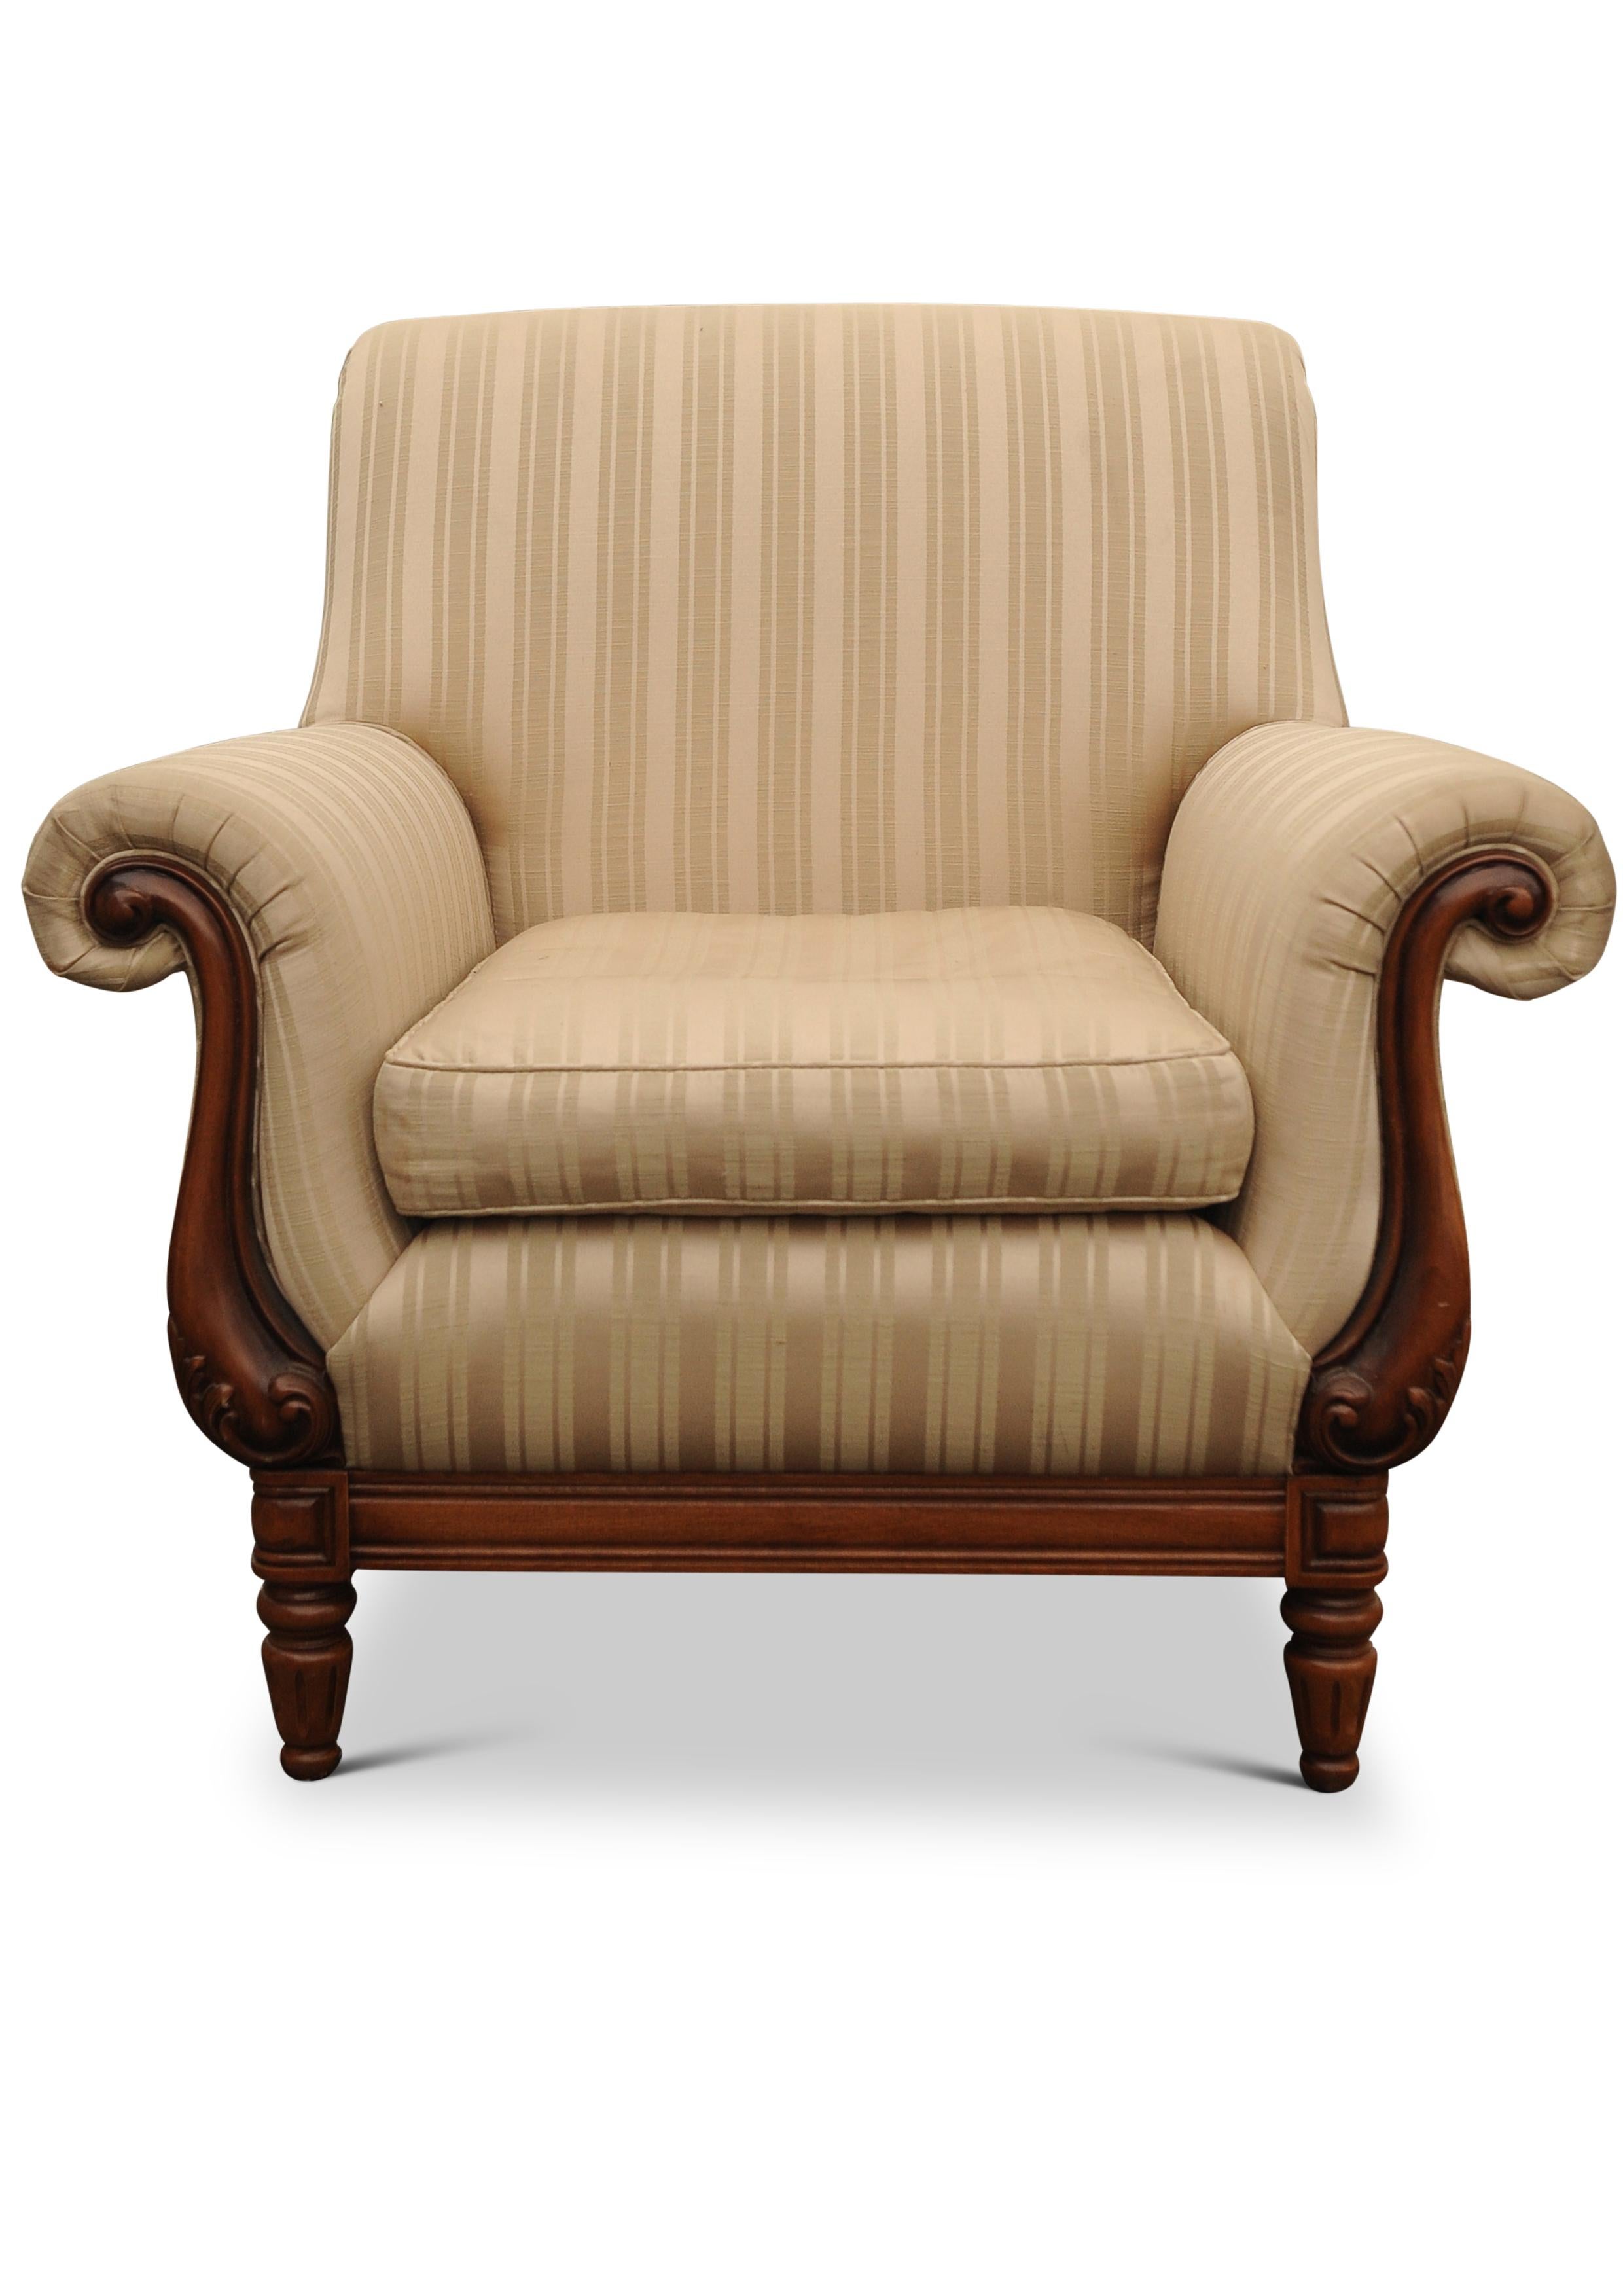 Contemporary A William IV Empire Design Library Armchair Striped Cream Silk Upholstery For Sale